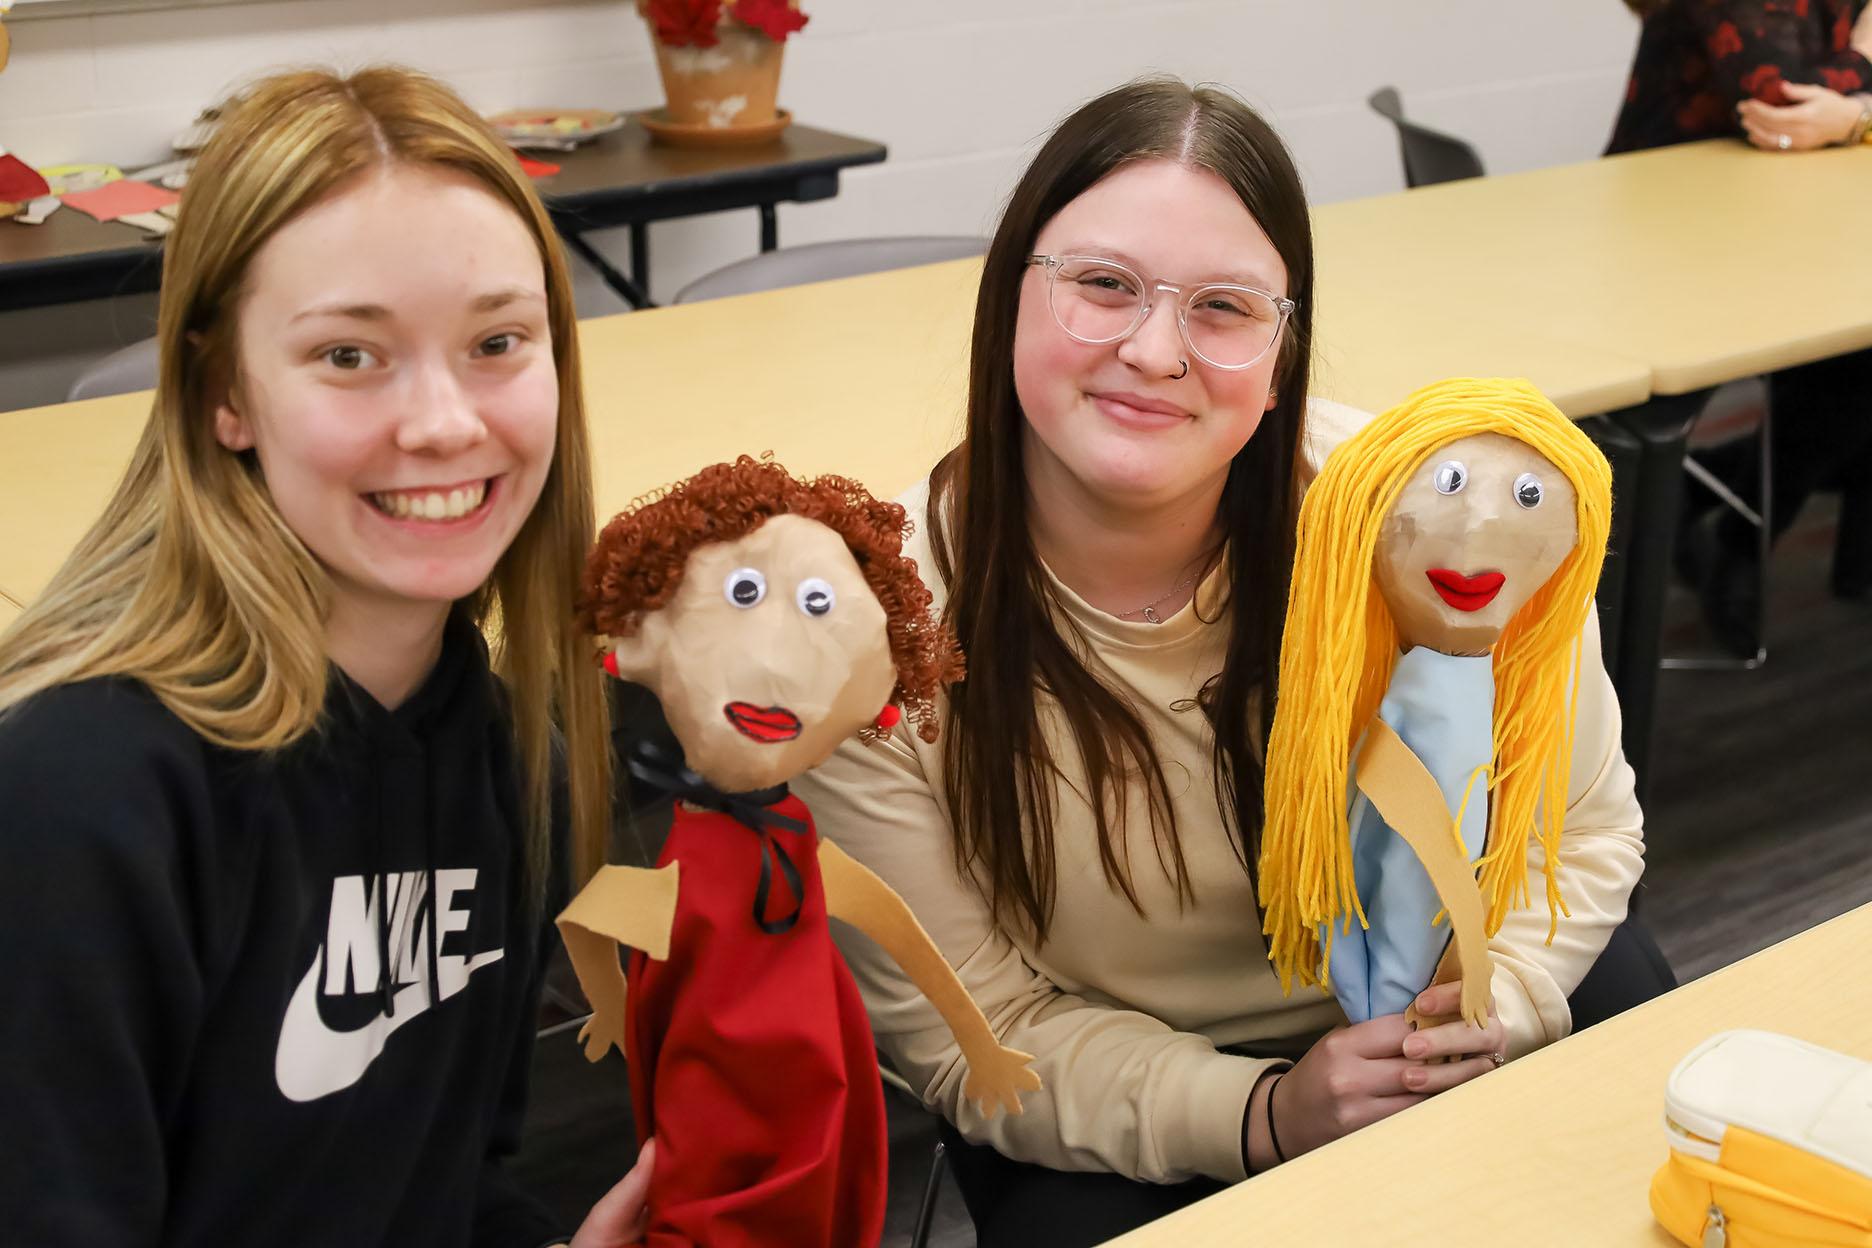 Two young women holding homemade puppets